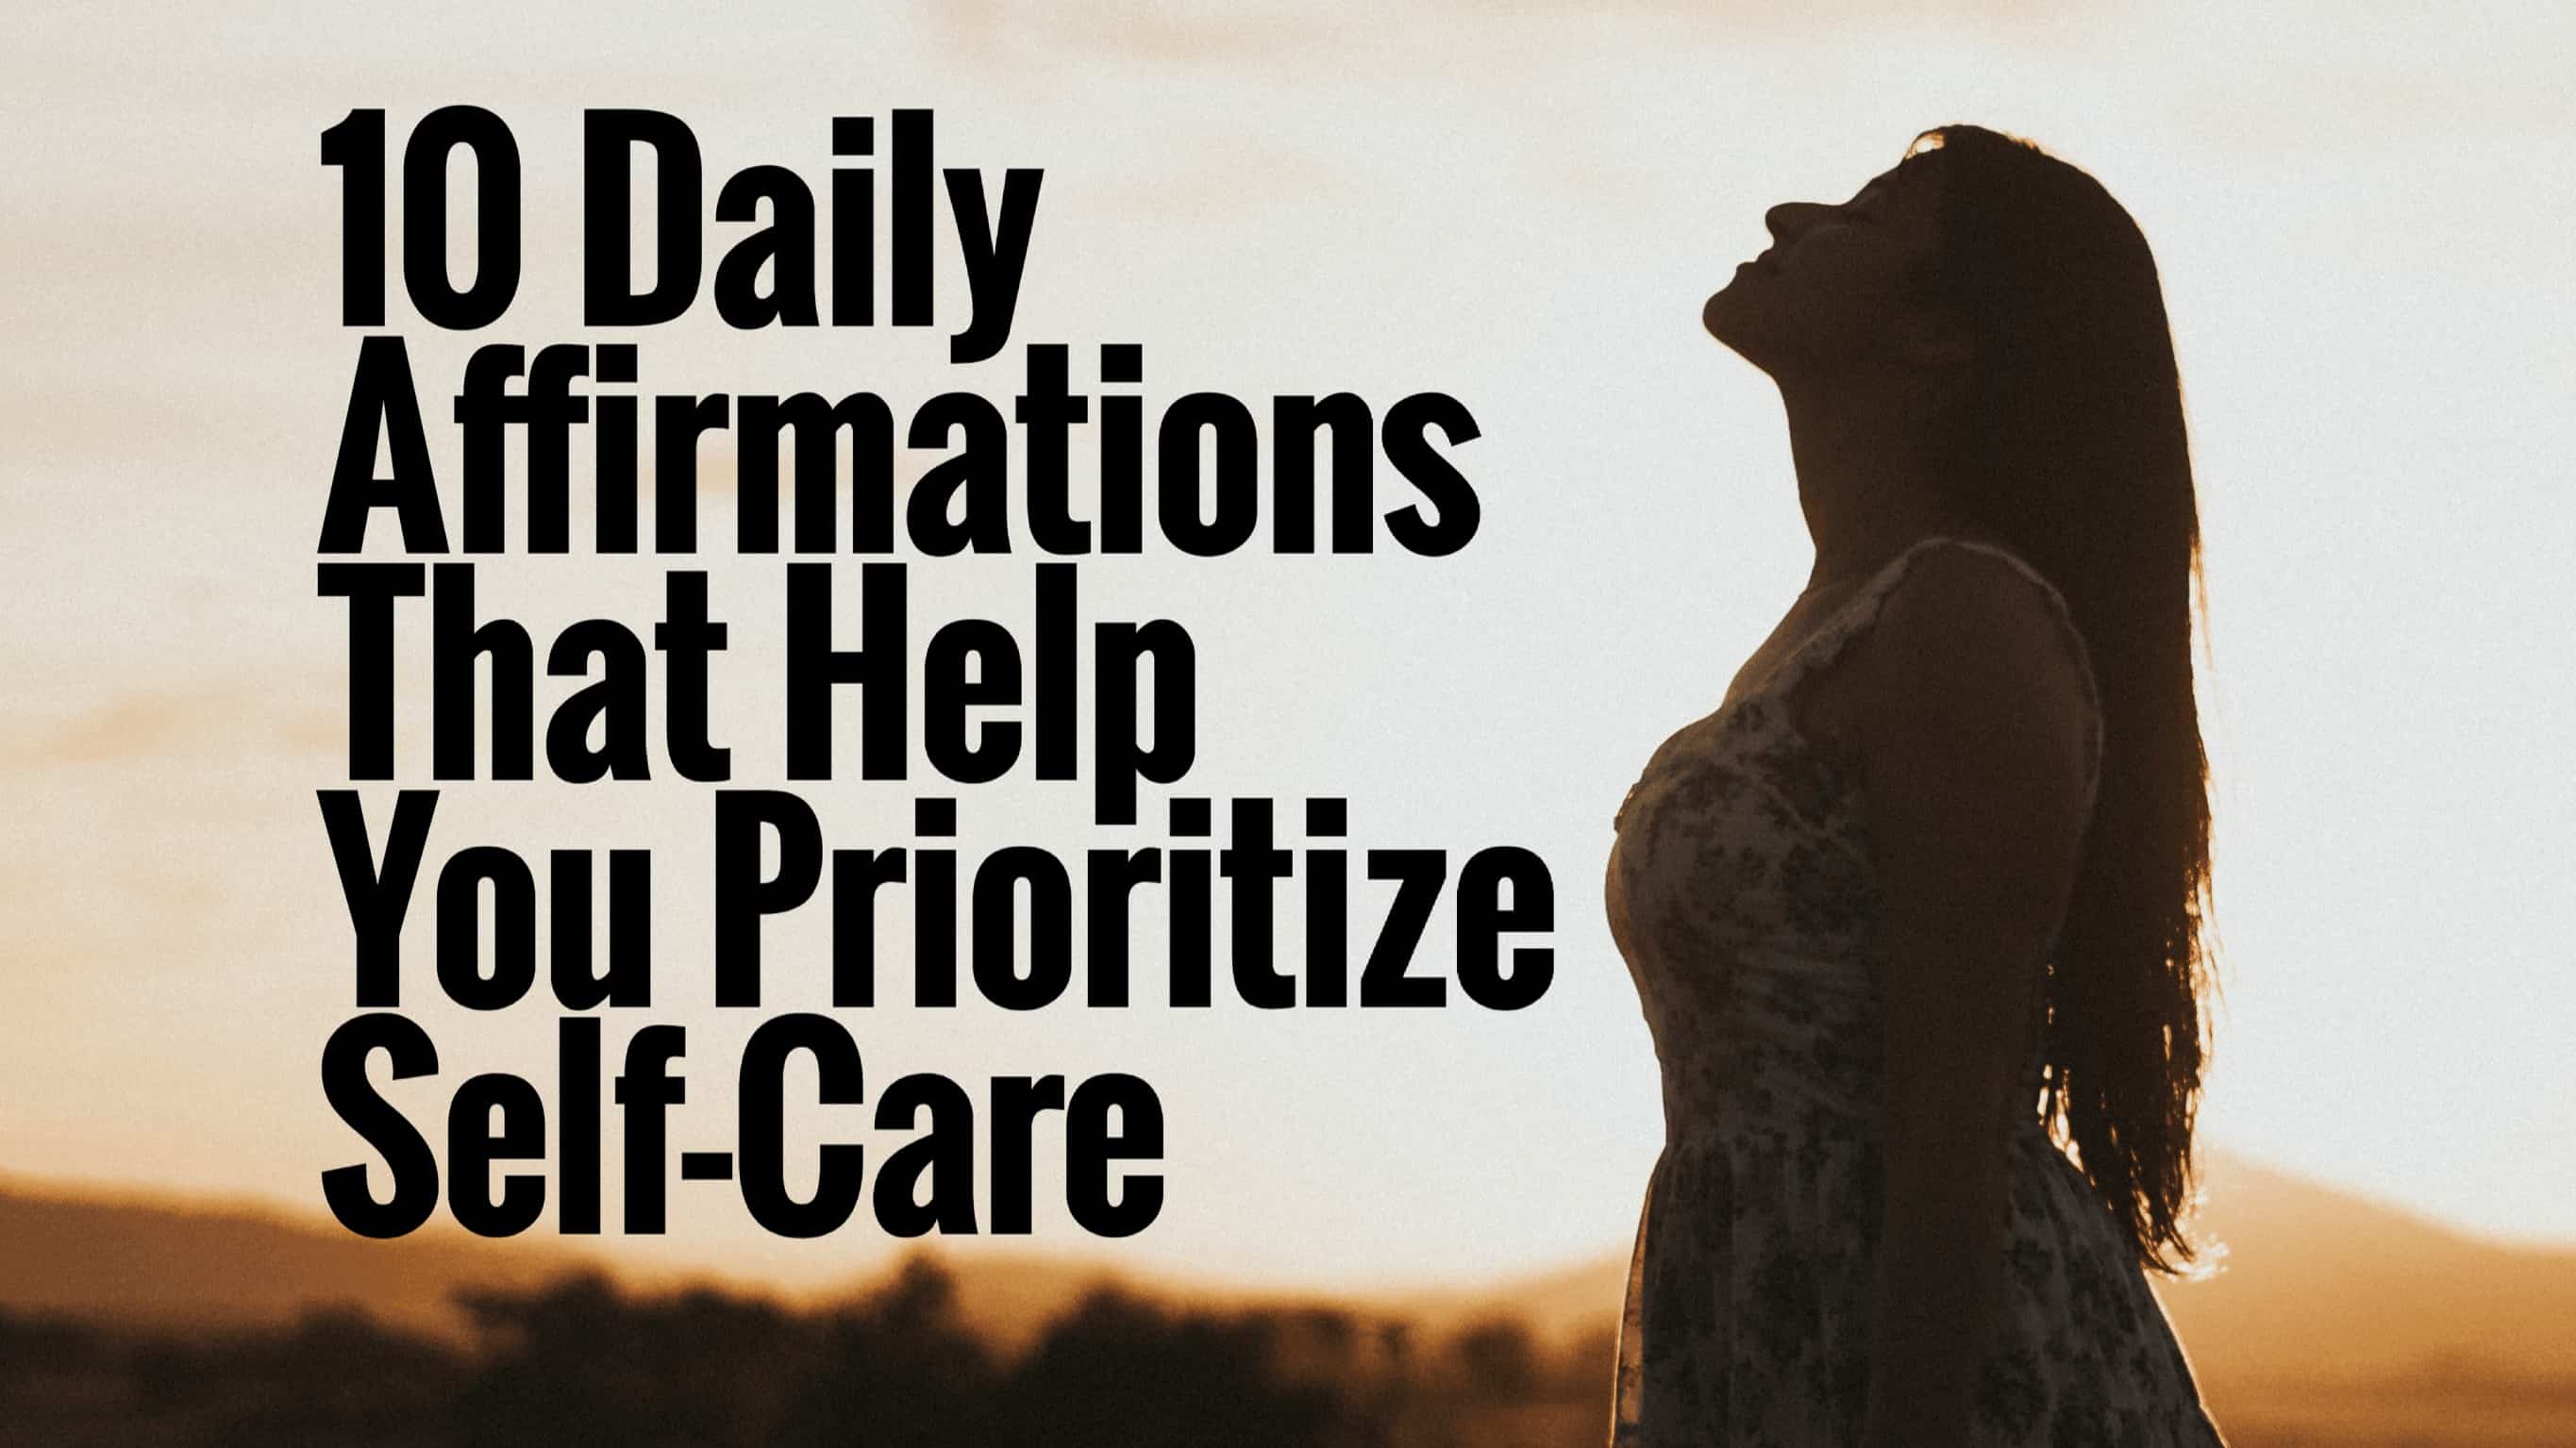 10 Daily Affirmations That Help You Prioritize Self-Care